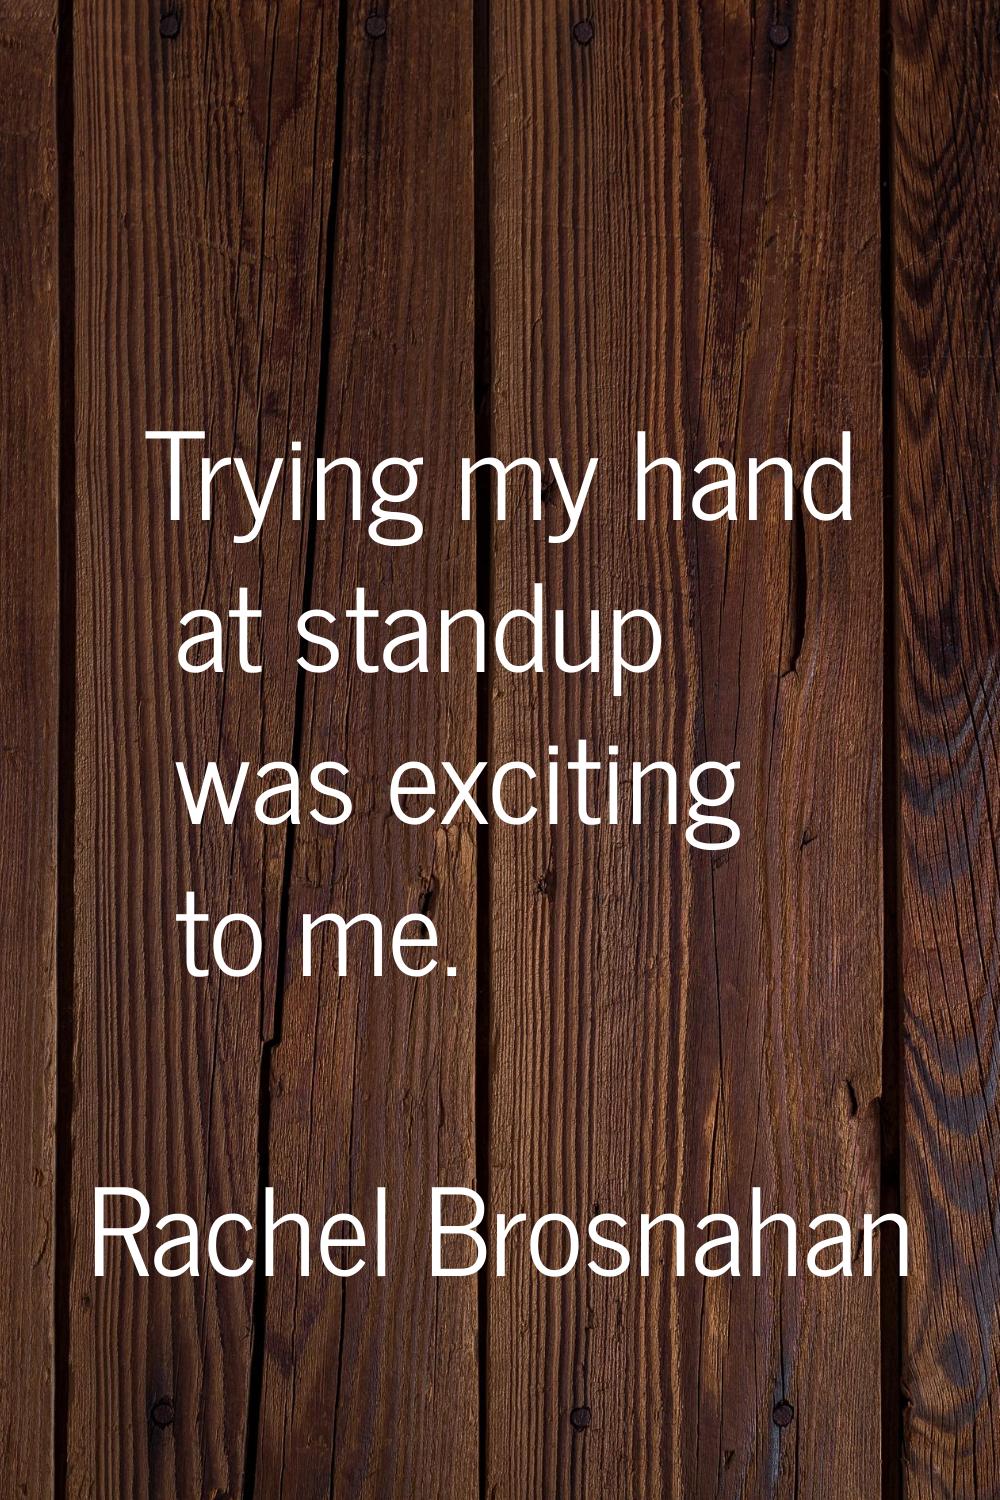 Trying my hand at standup was exciting to me.